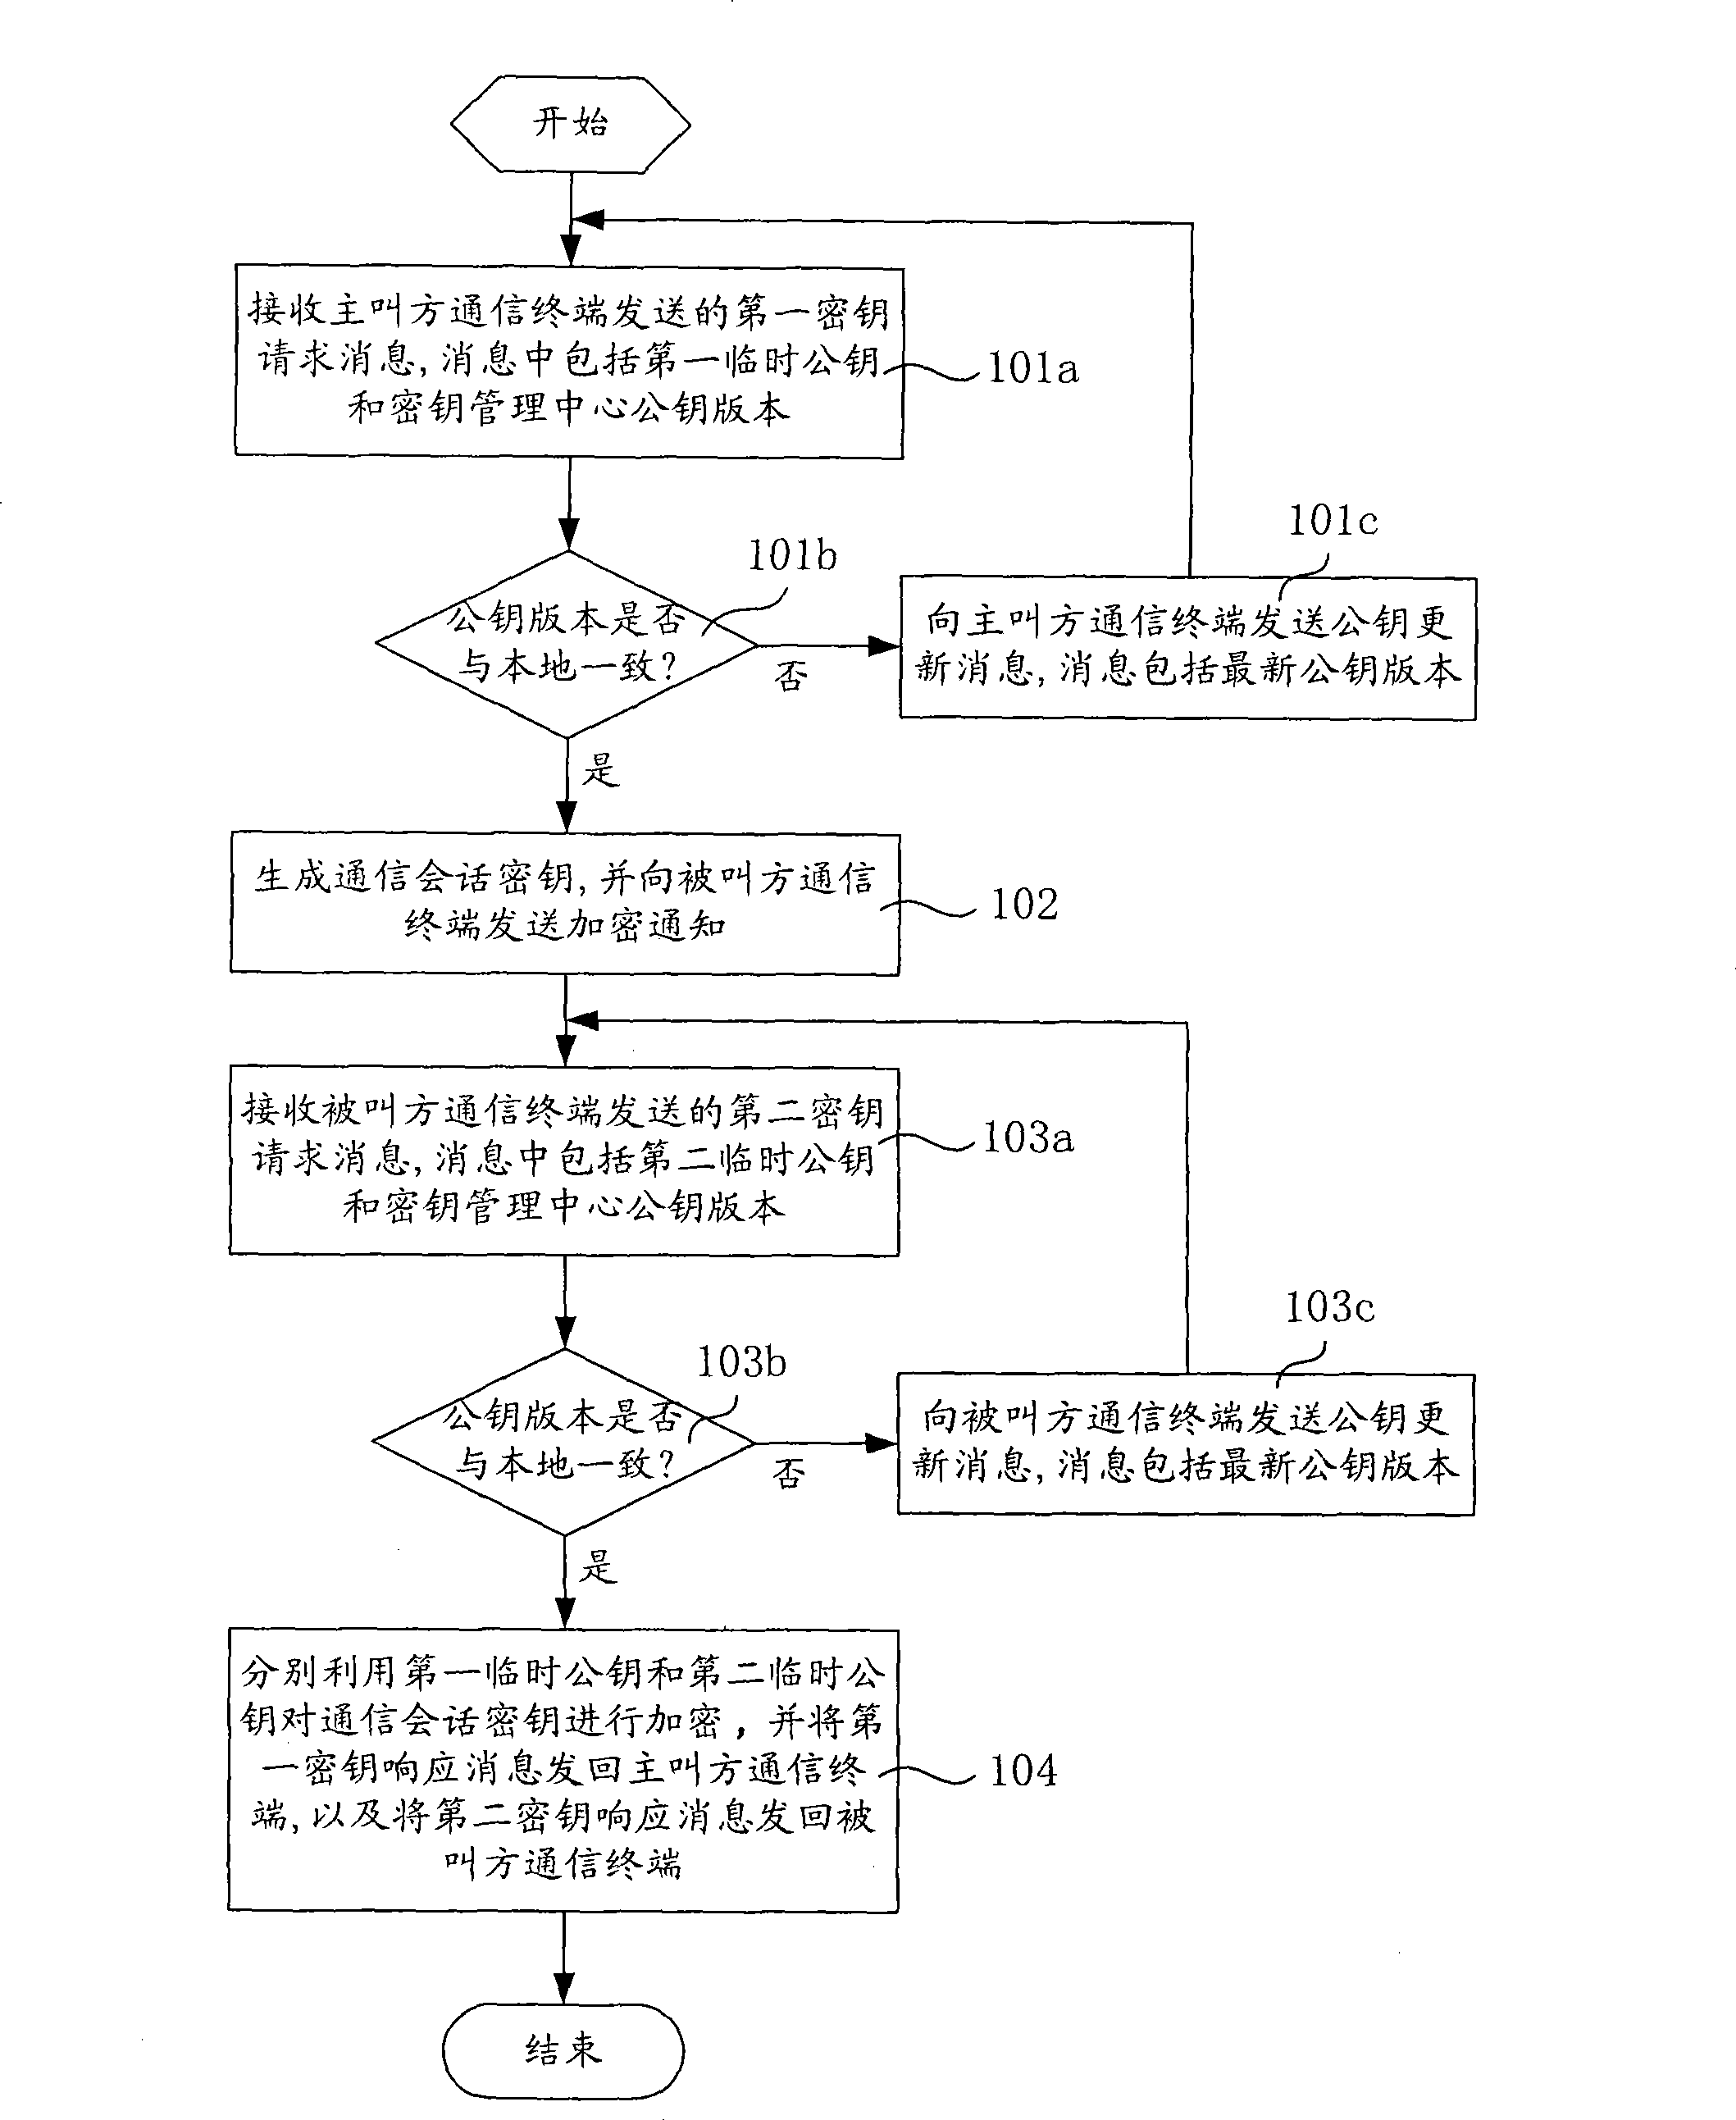 Session cipher key distributing method and system